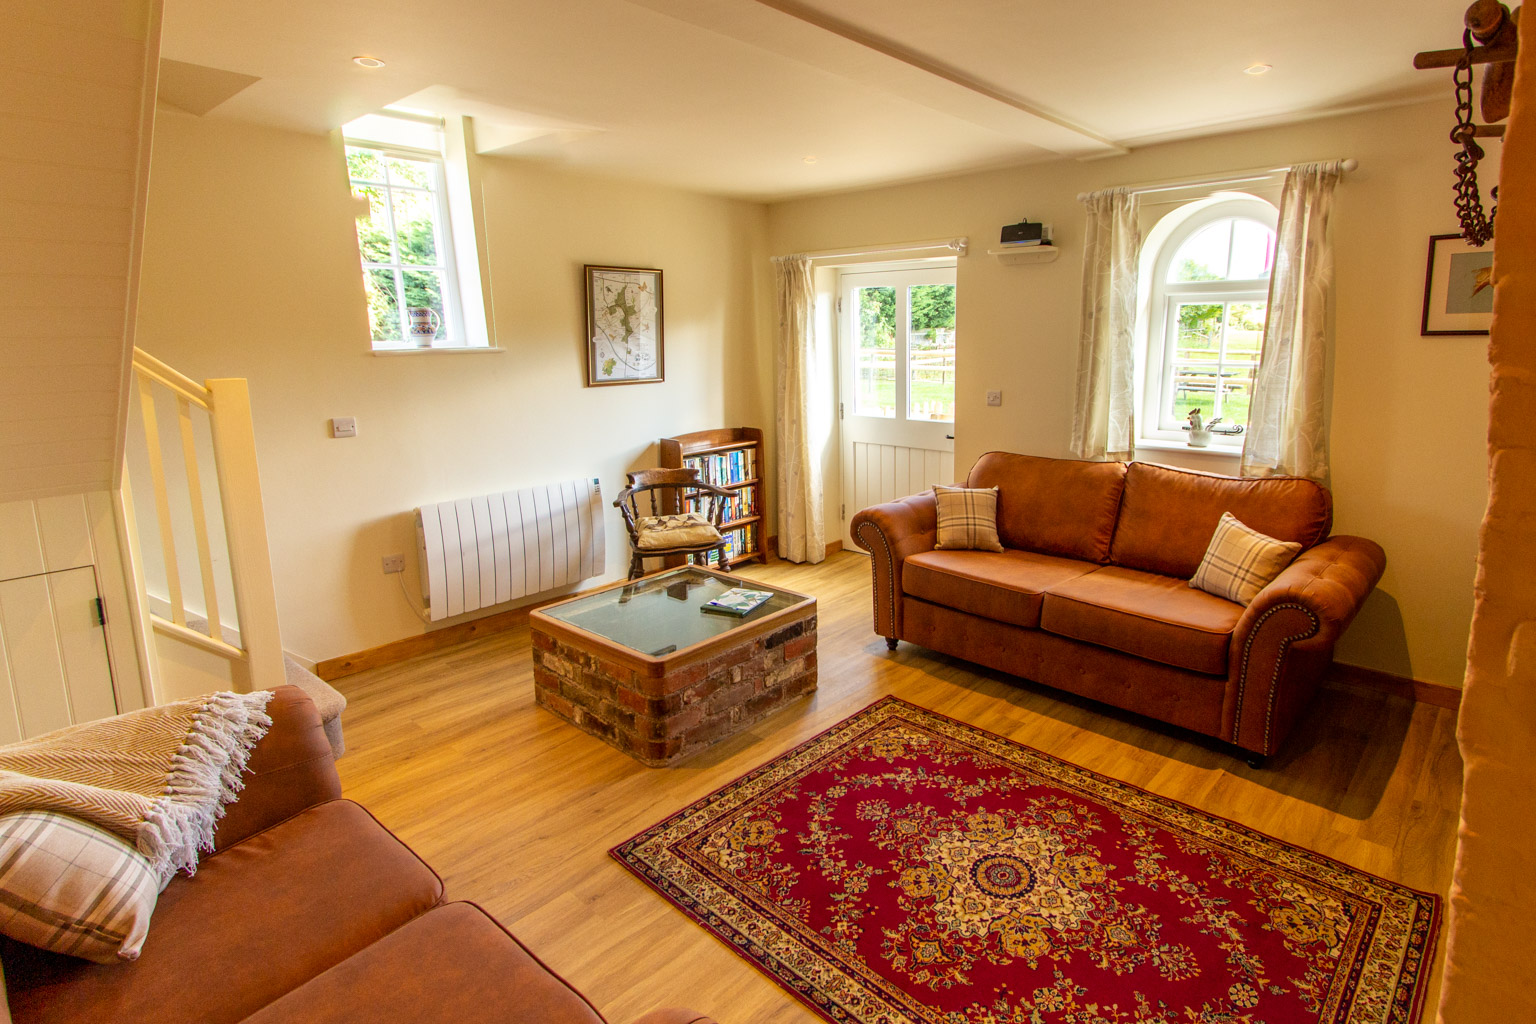 The warm and cosy living room, the perfect place to rest the feet after a long afternoon walk